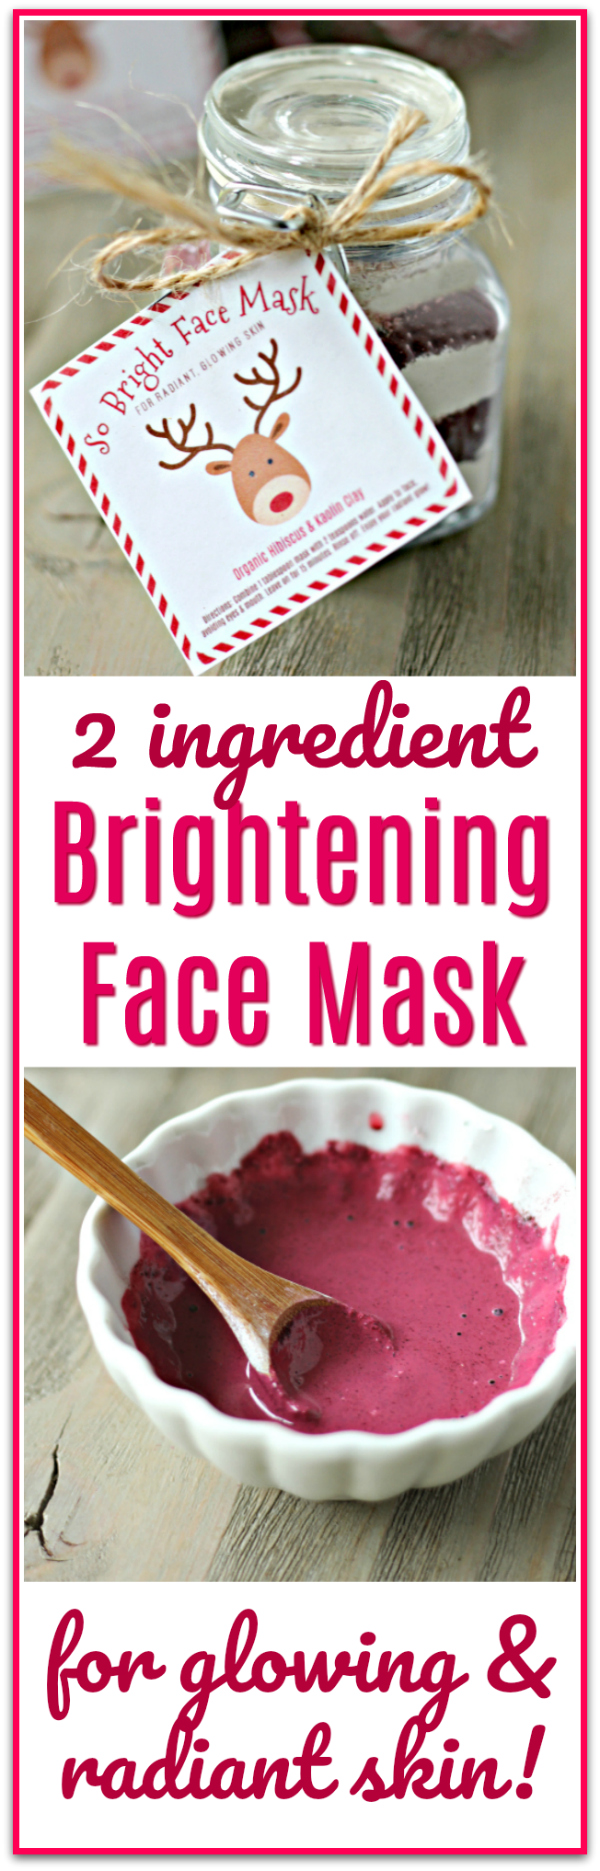 Brightening Face Mask Free Printable Labels for glowing skin